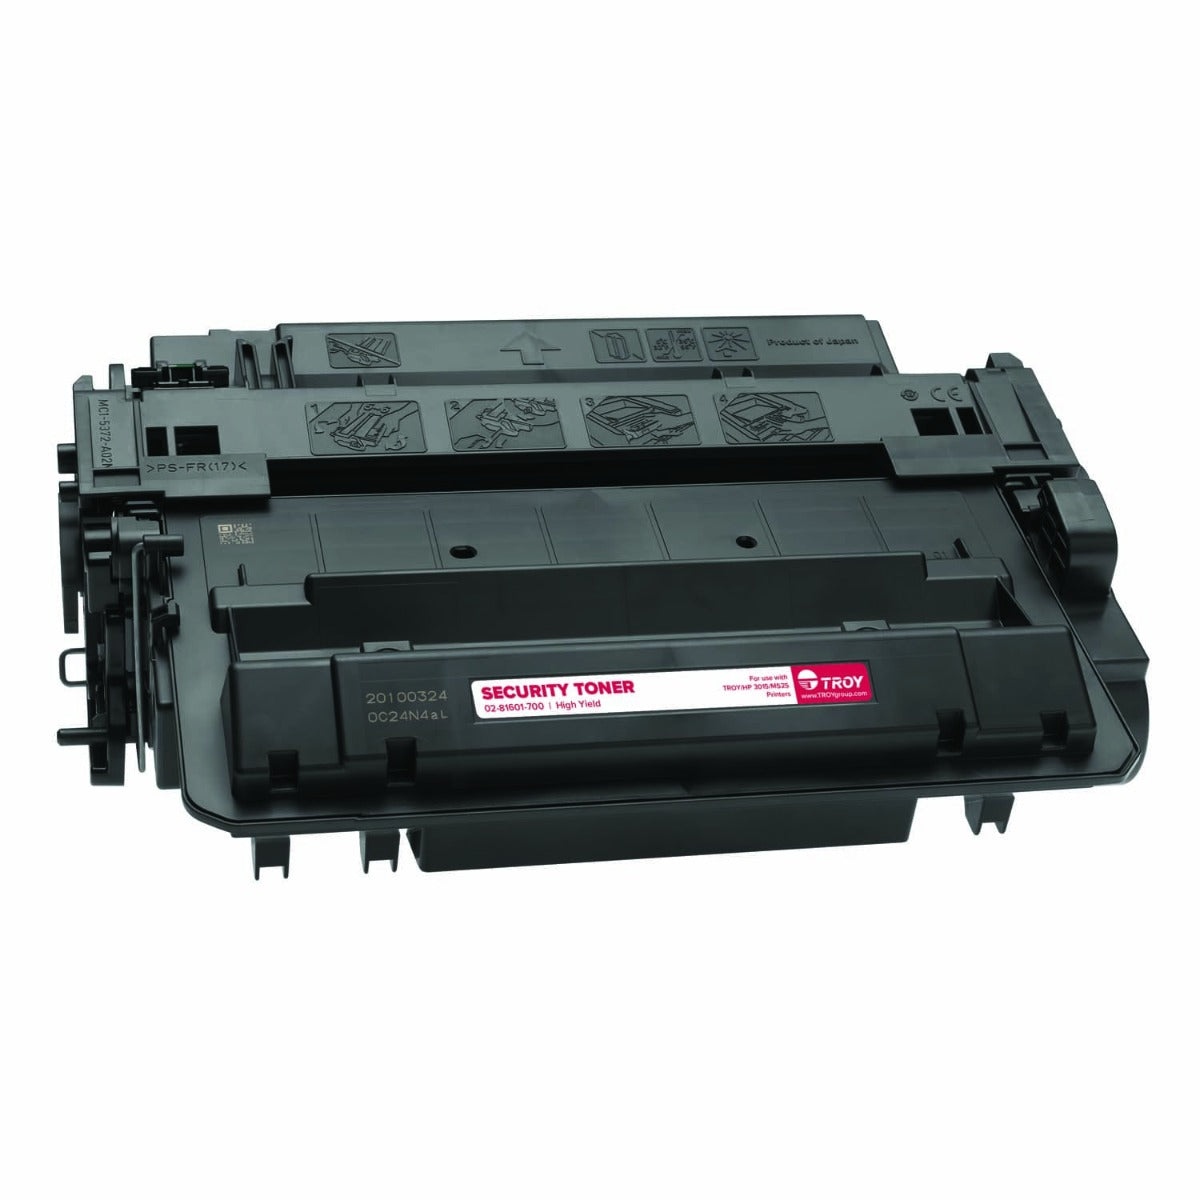 TROY 3015/M525 MFP Security Toner High Yield